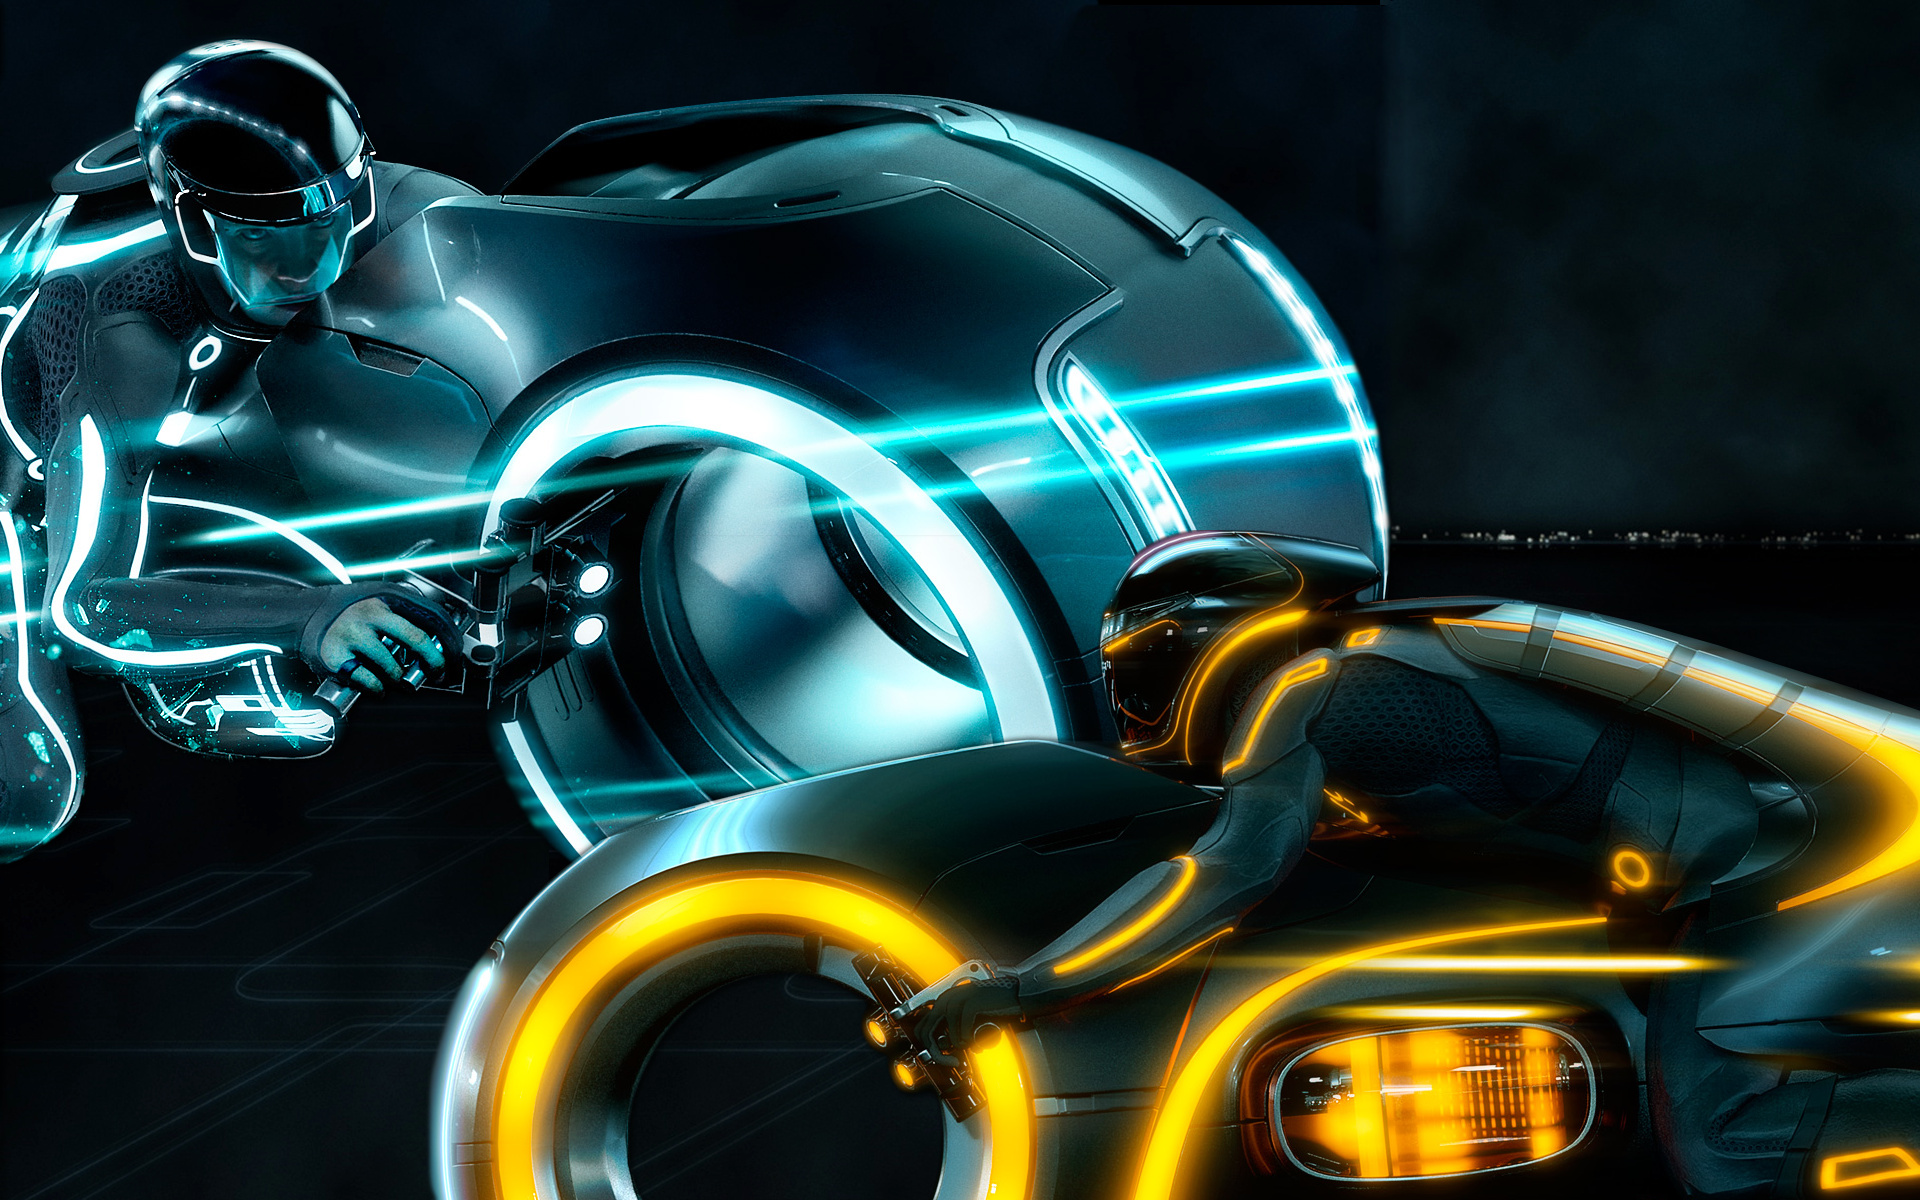 Tron (Movie): The film was a box office success, grossing over $400 million worldwide. 1920x1200 HD Background.